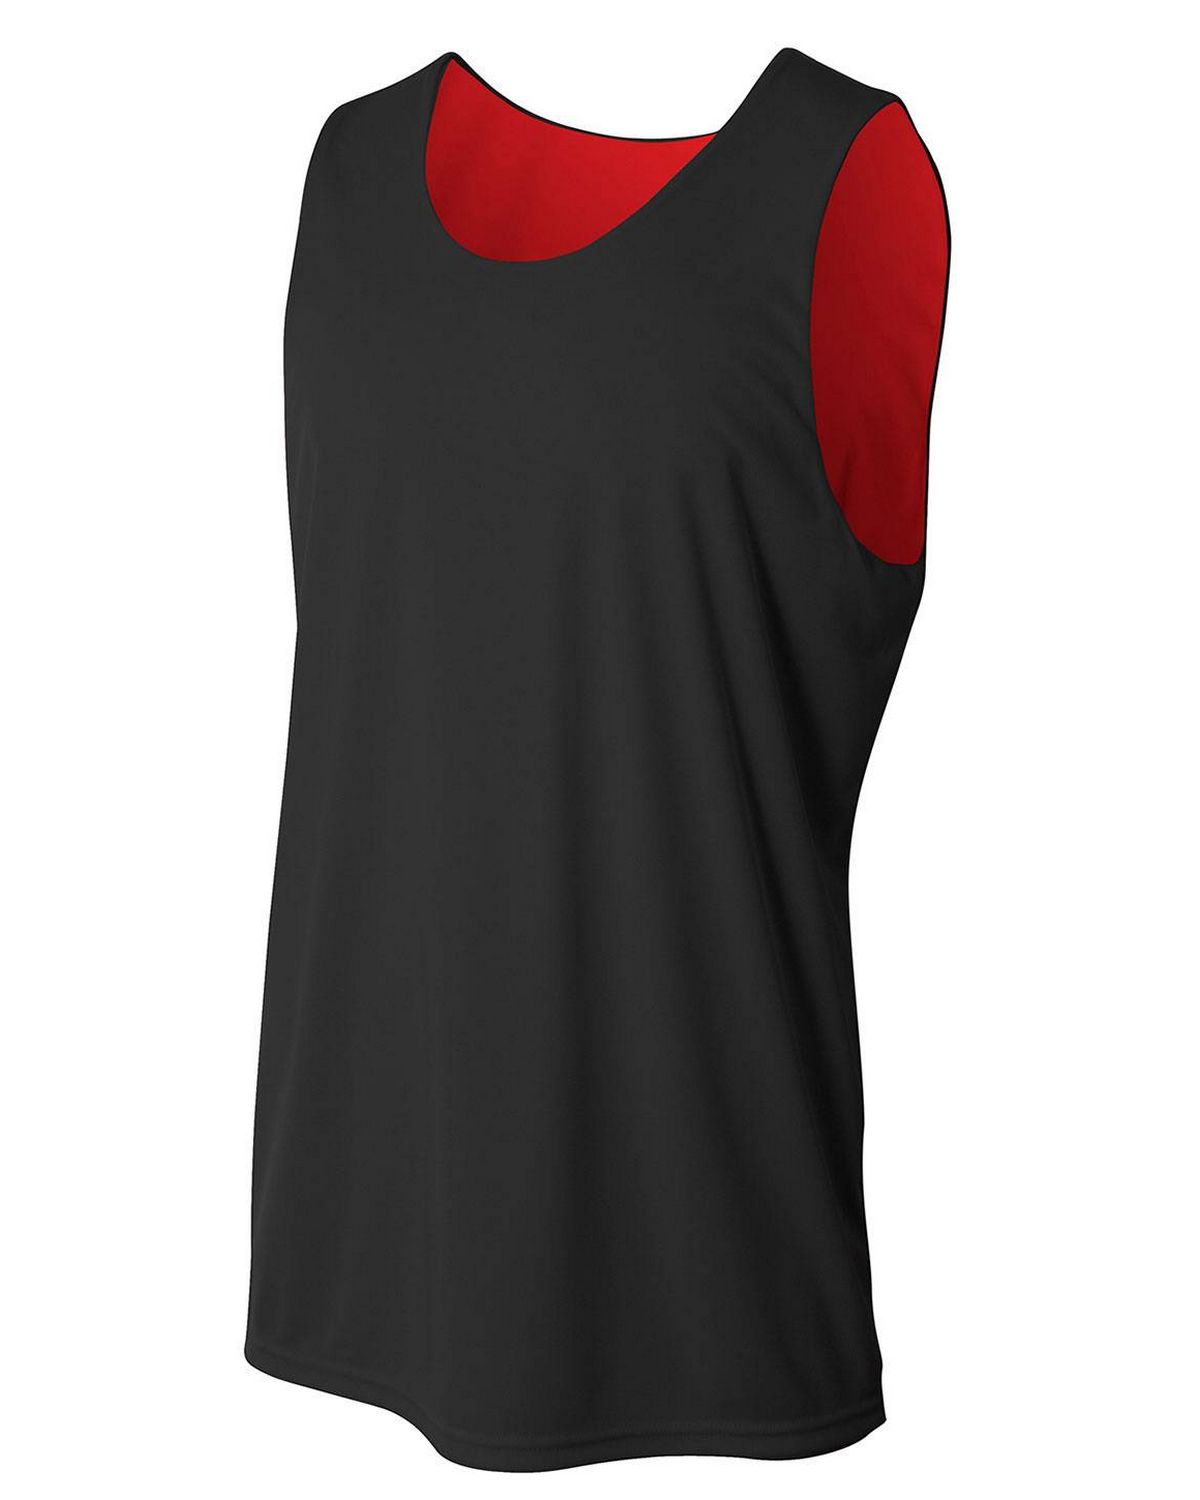 black and red reversible basketball jerseys